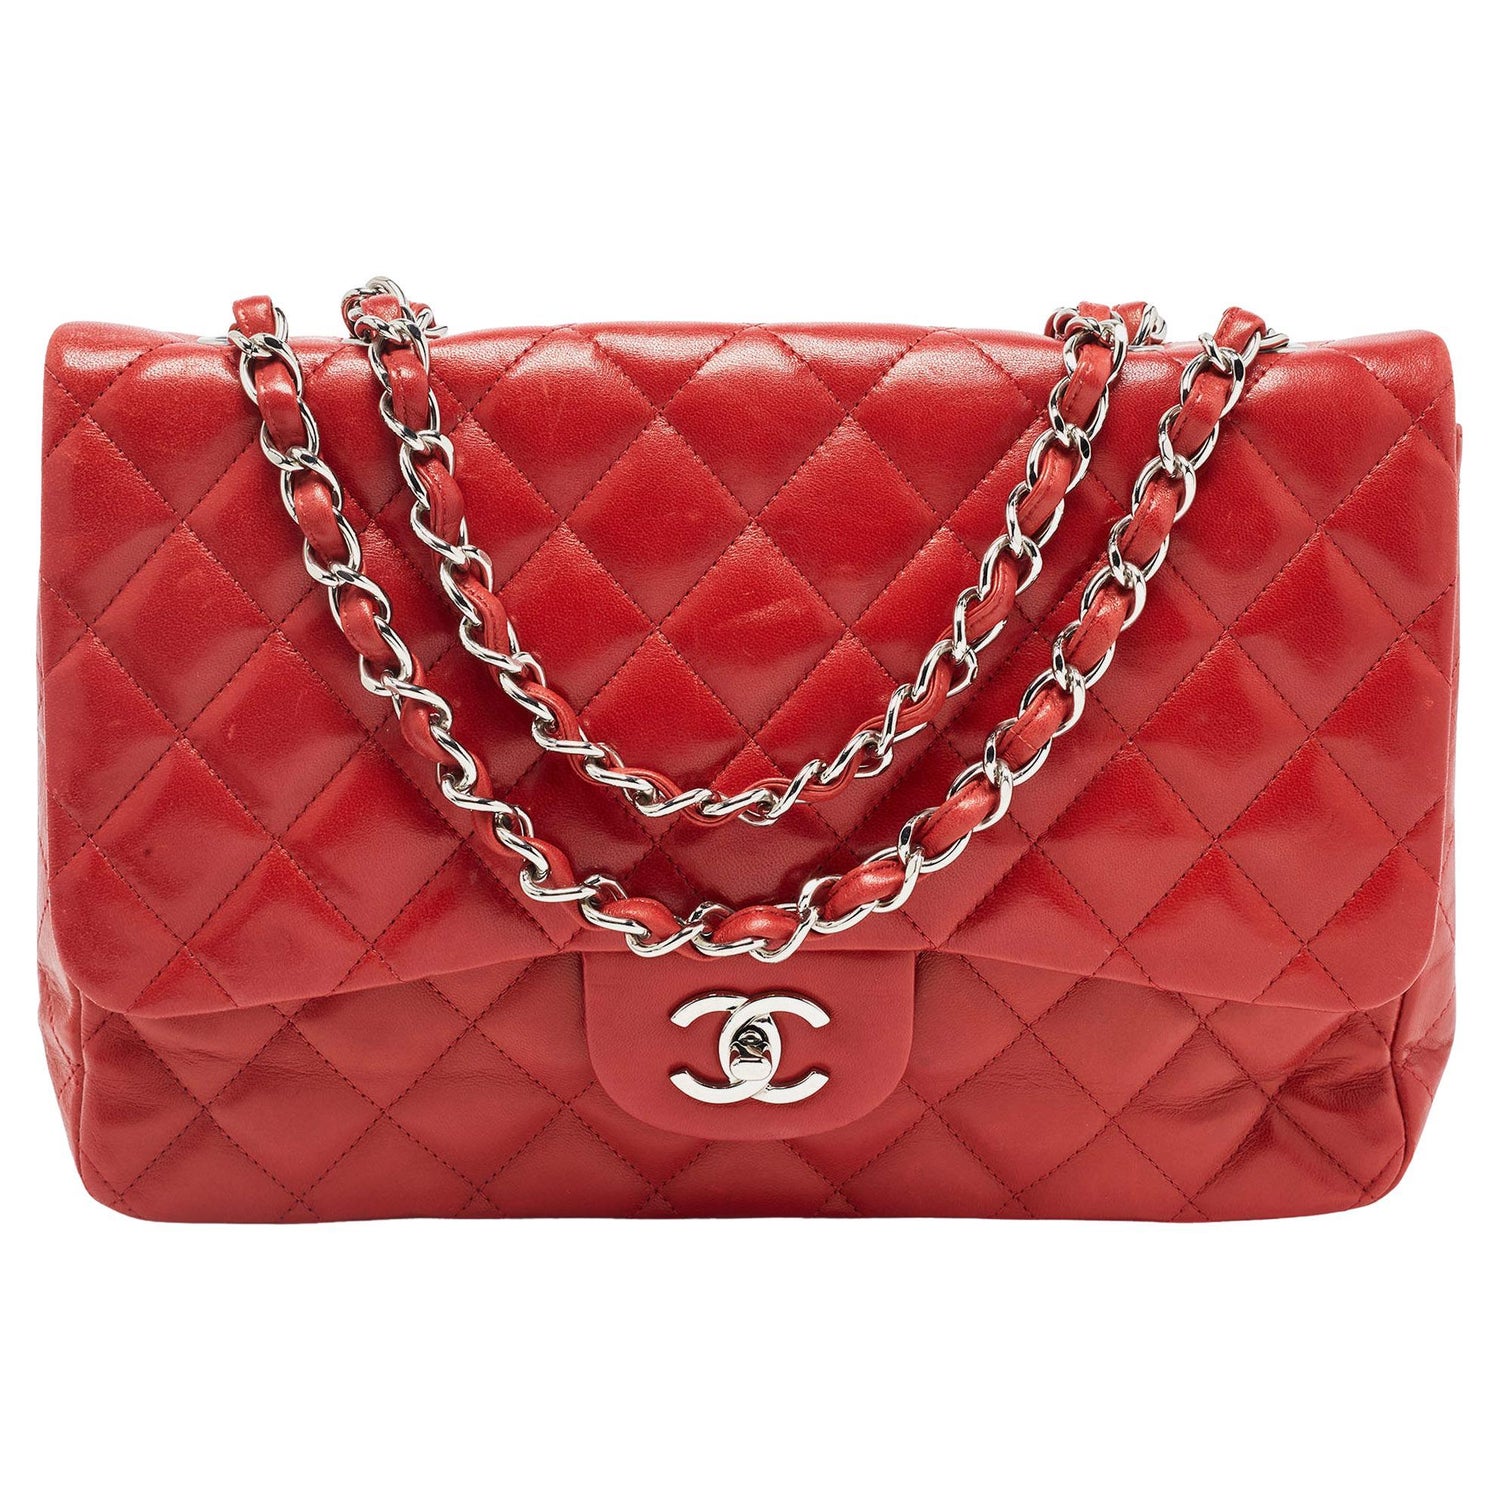 Chanel Classic Double Flap Bag Quilted Floral Tweed Medium